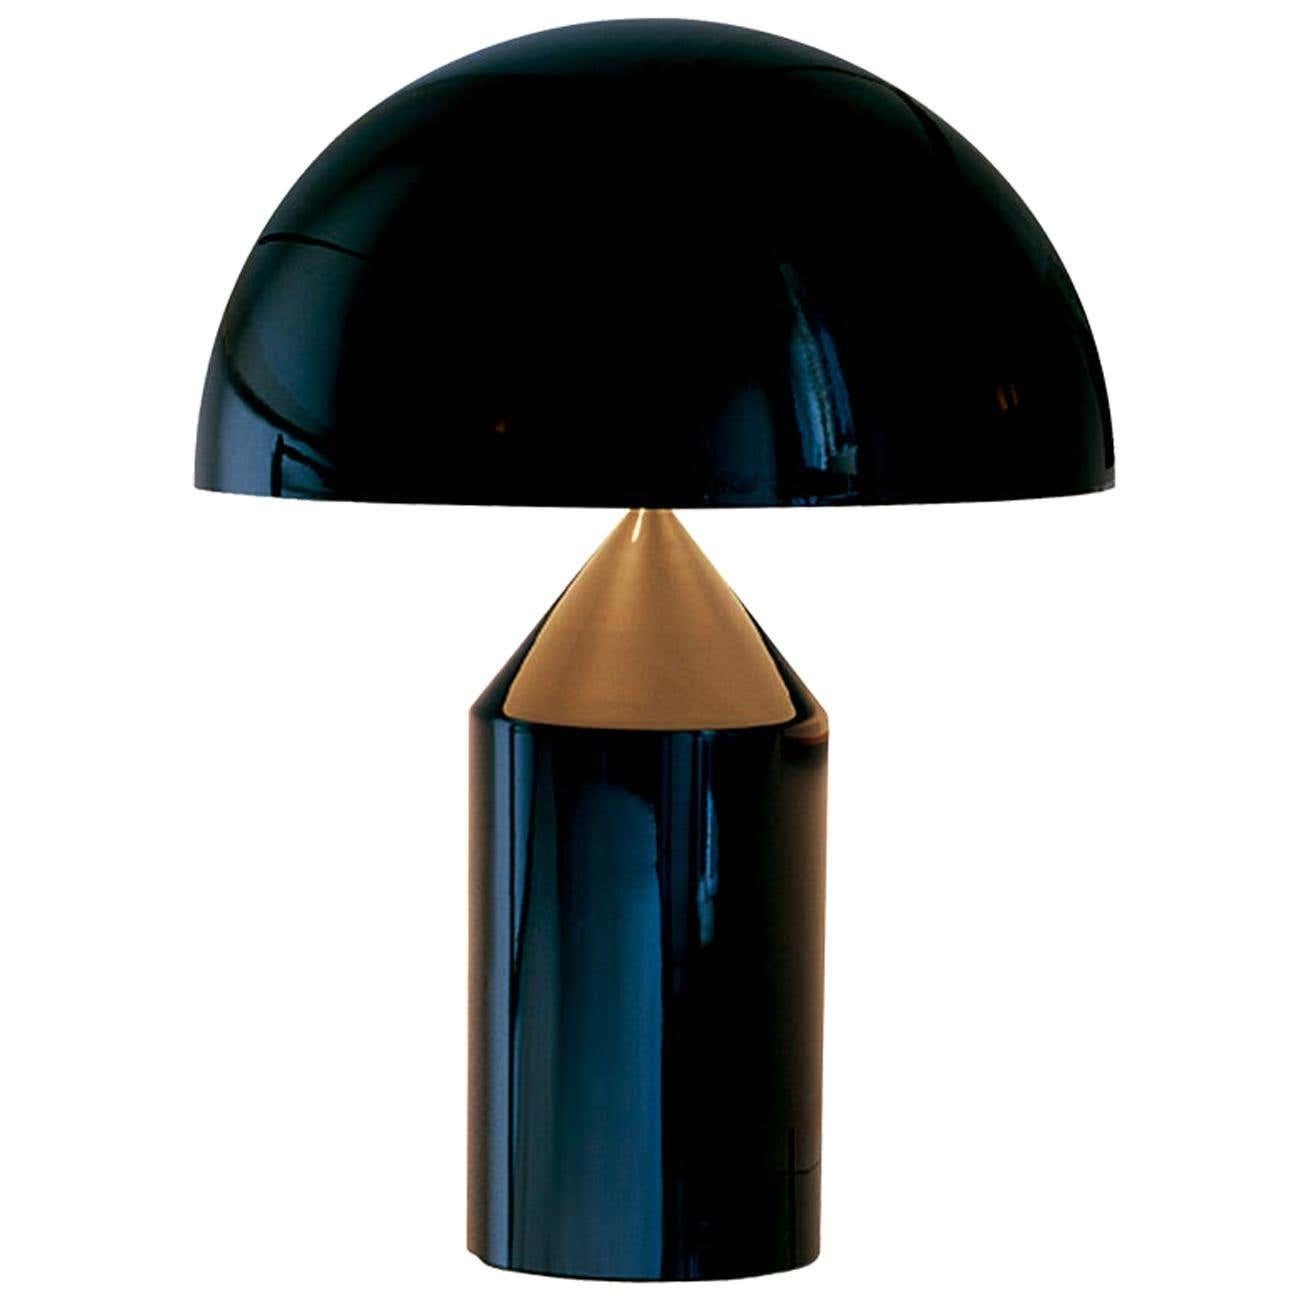 Table lamp designed by Vico Magistretti in 1977
Manufactured by Oluce, Italy.

Designed in 1977 by Vico Magistretti, over the years, Atollo has become the archetype of the table lamp, winning the Compasso d’Oro in 1979 and completely